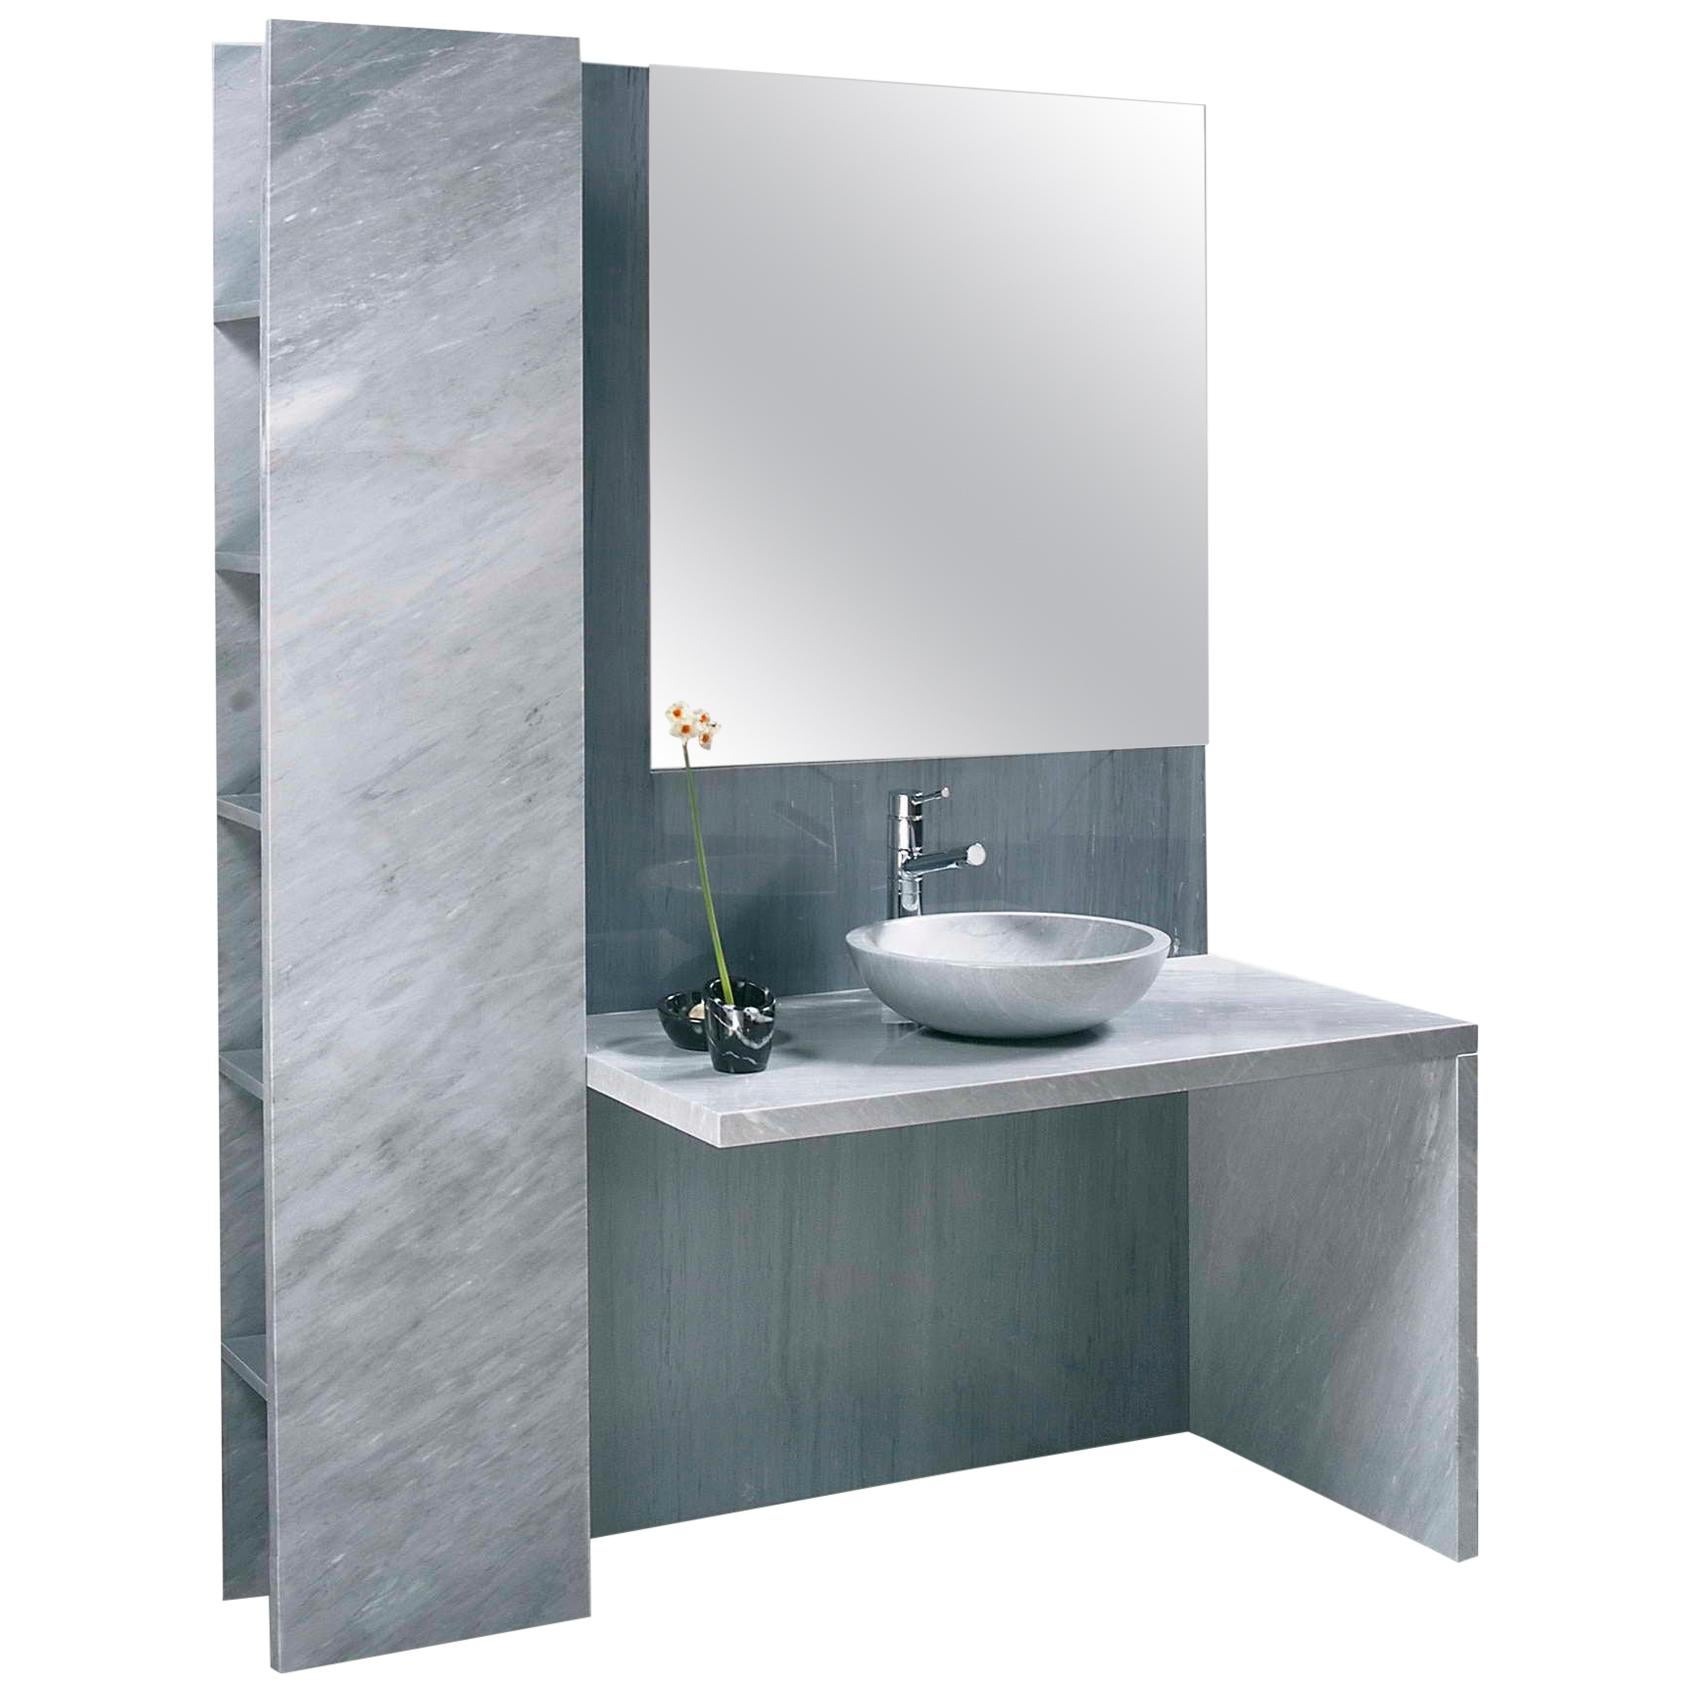 21st Century Marble Bathroom Fitted Wall in White Carrara & Bardiglio Imperiale For Sale